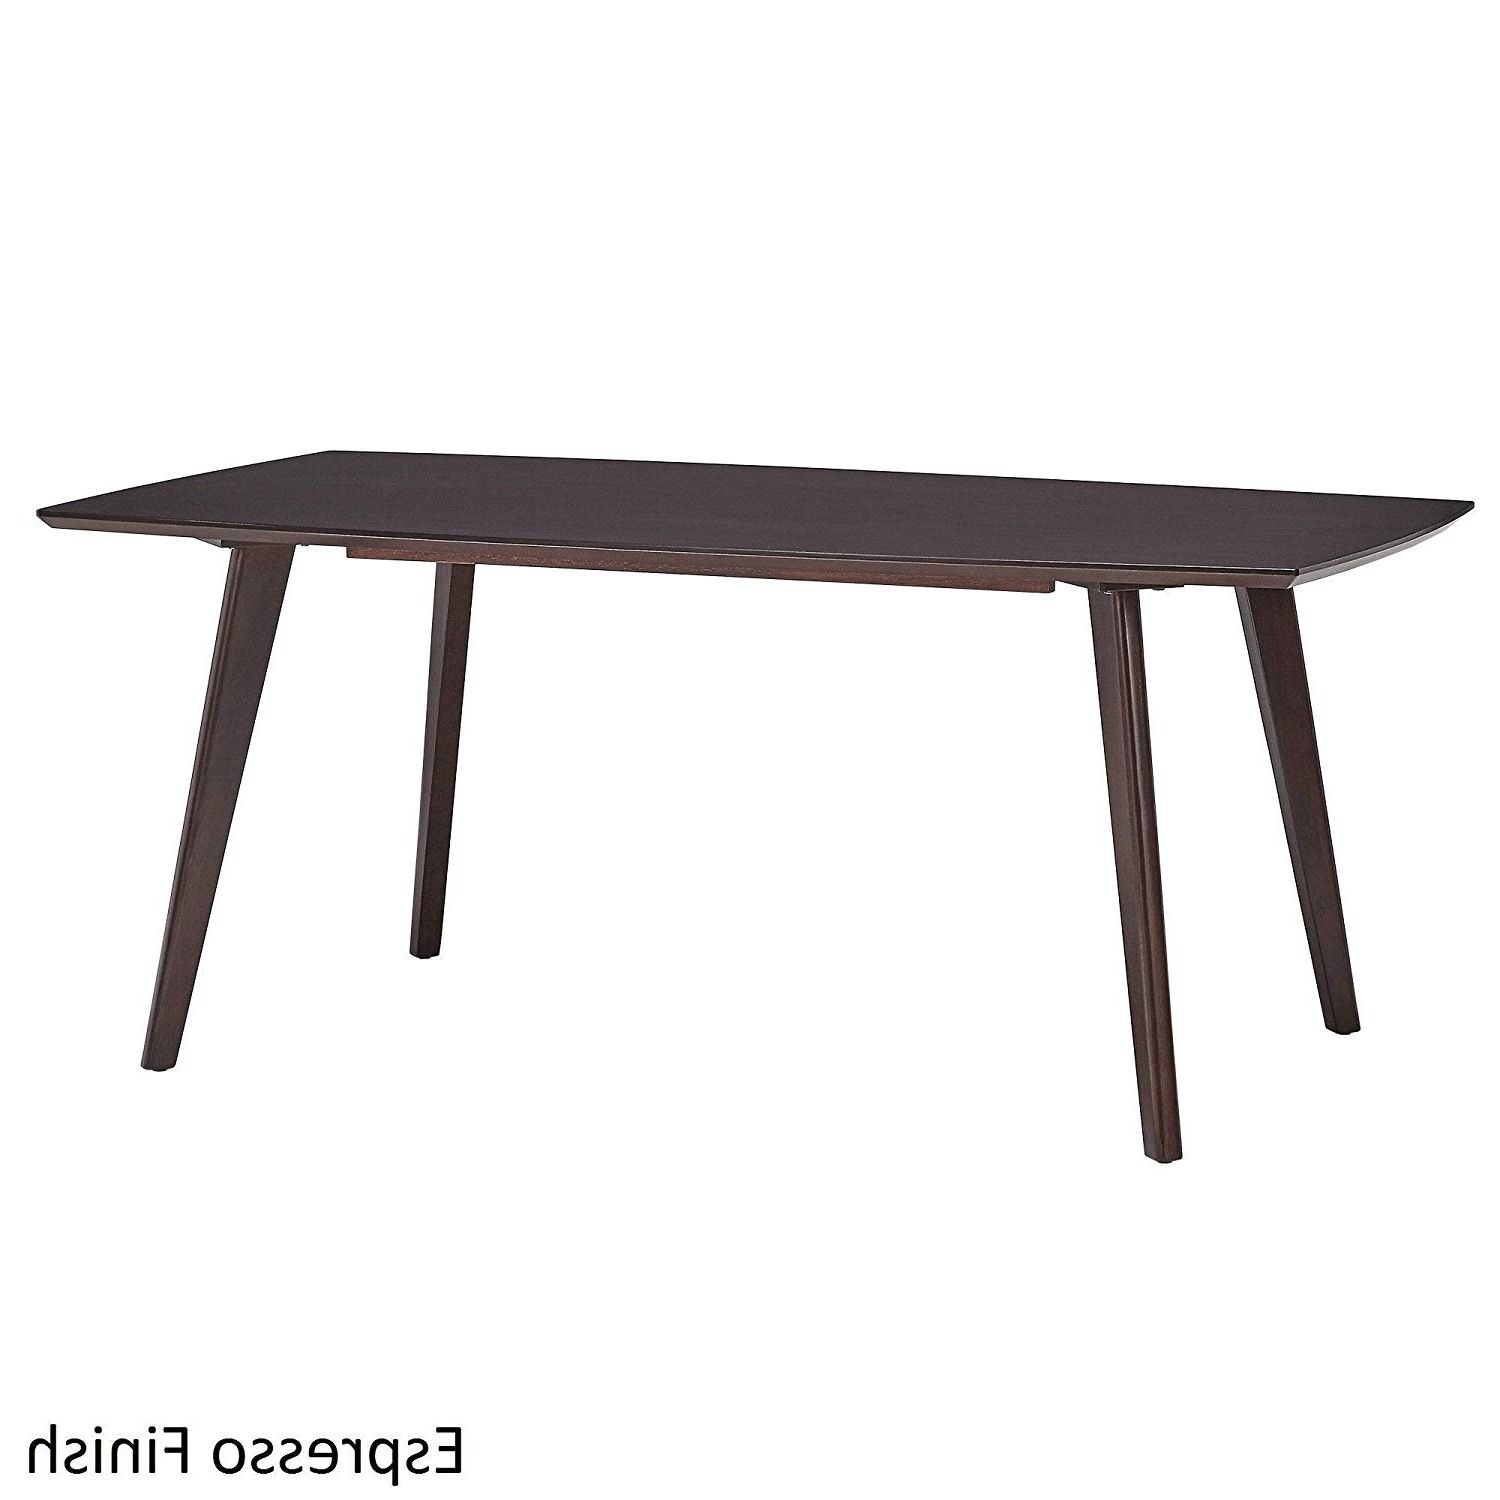 Shaw Dining Tables, English Brown Within Most Current Amazon – Inspire Q Abelone Scandinavian Dining Table (View 6 of 25)